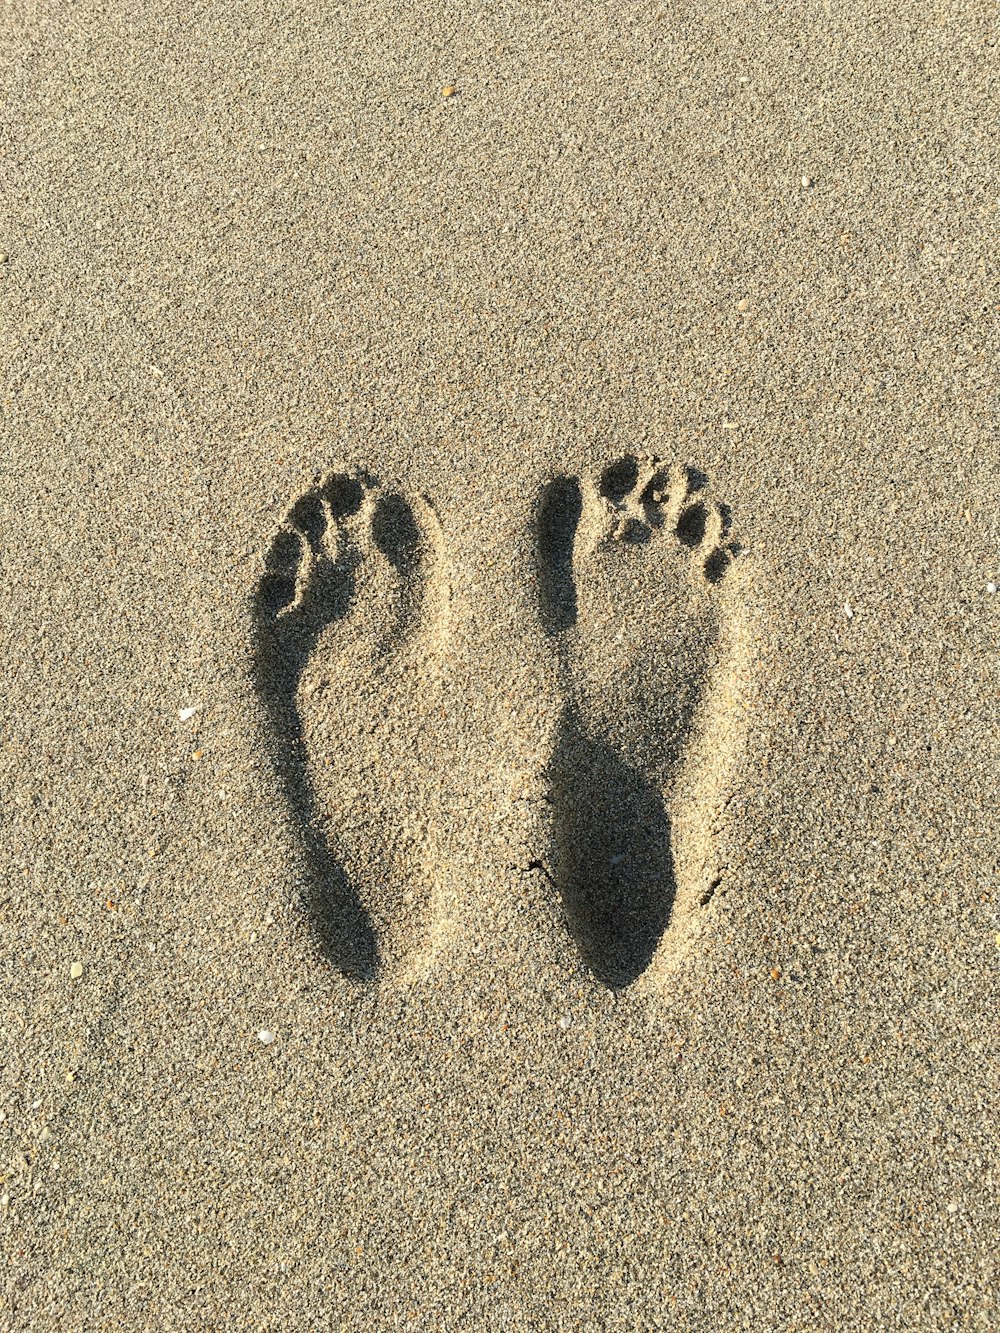 a close up of a person's footprints in the sand